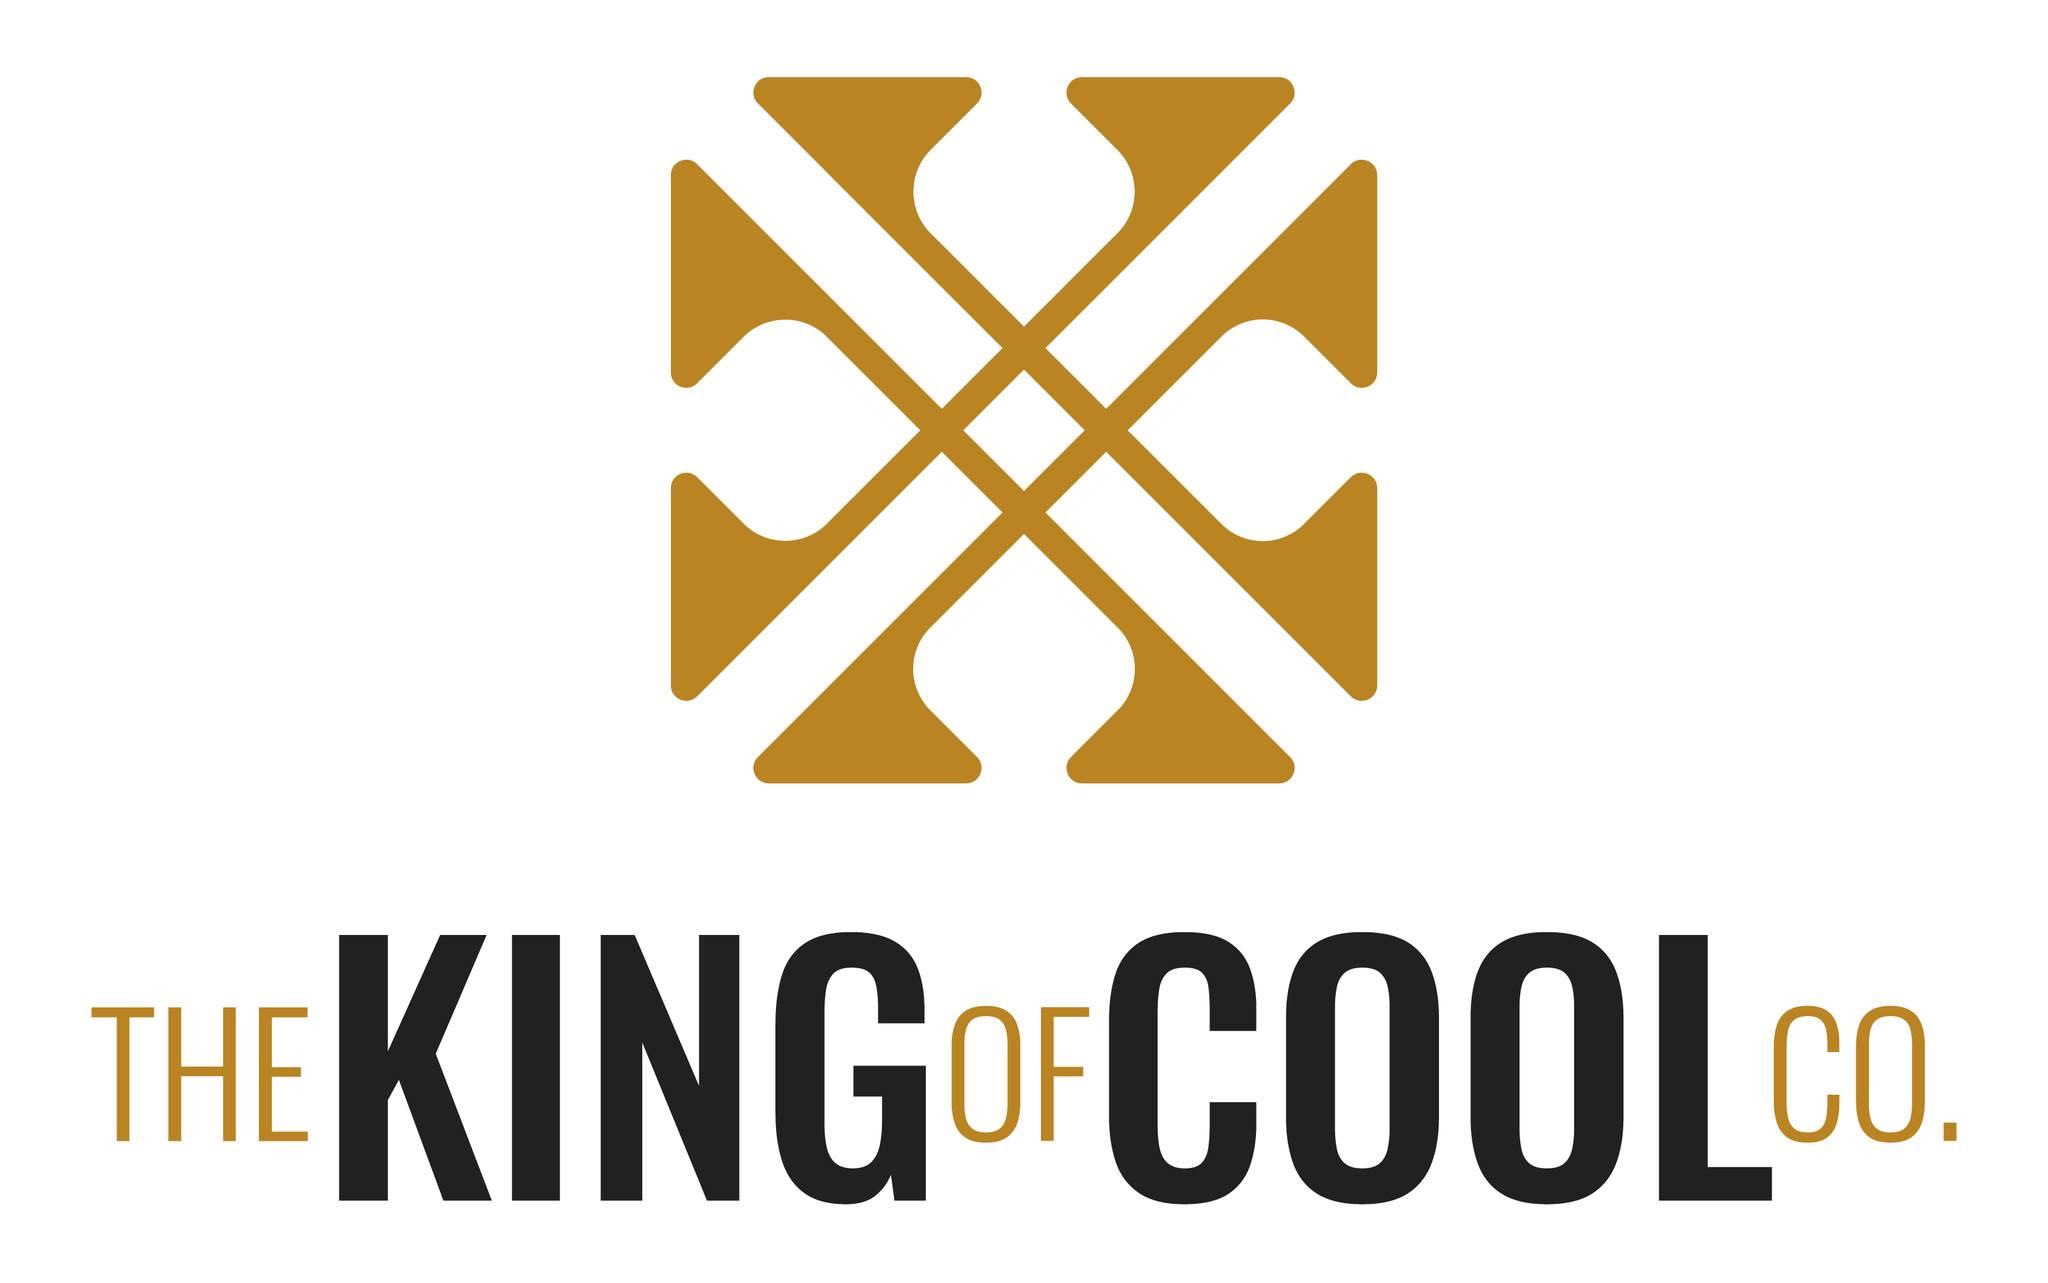 The King of Cool logo